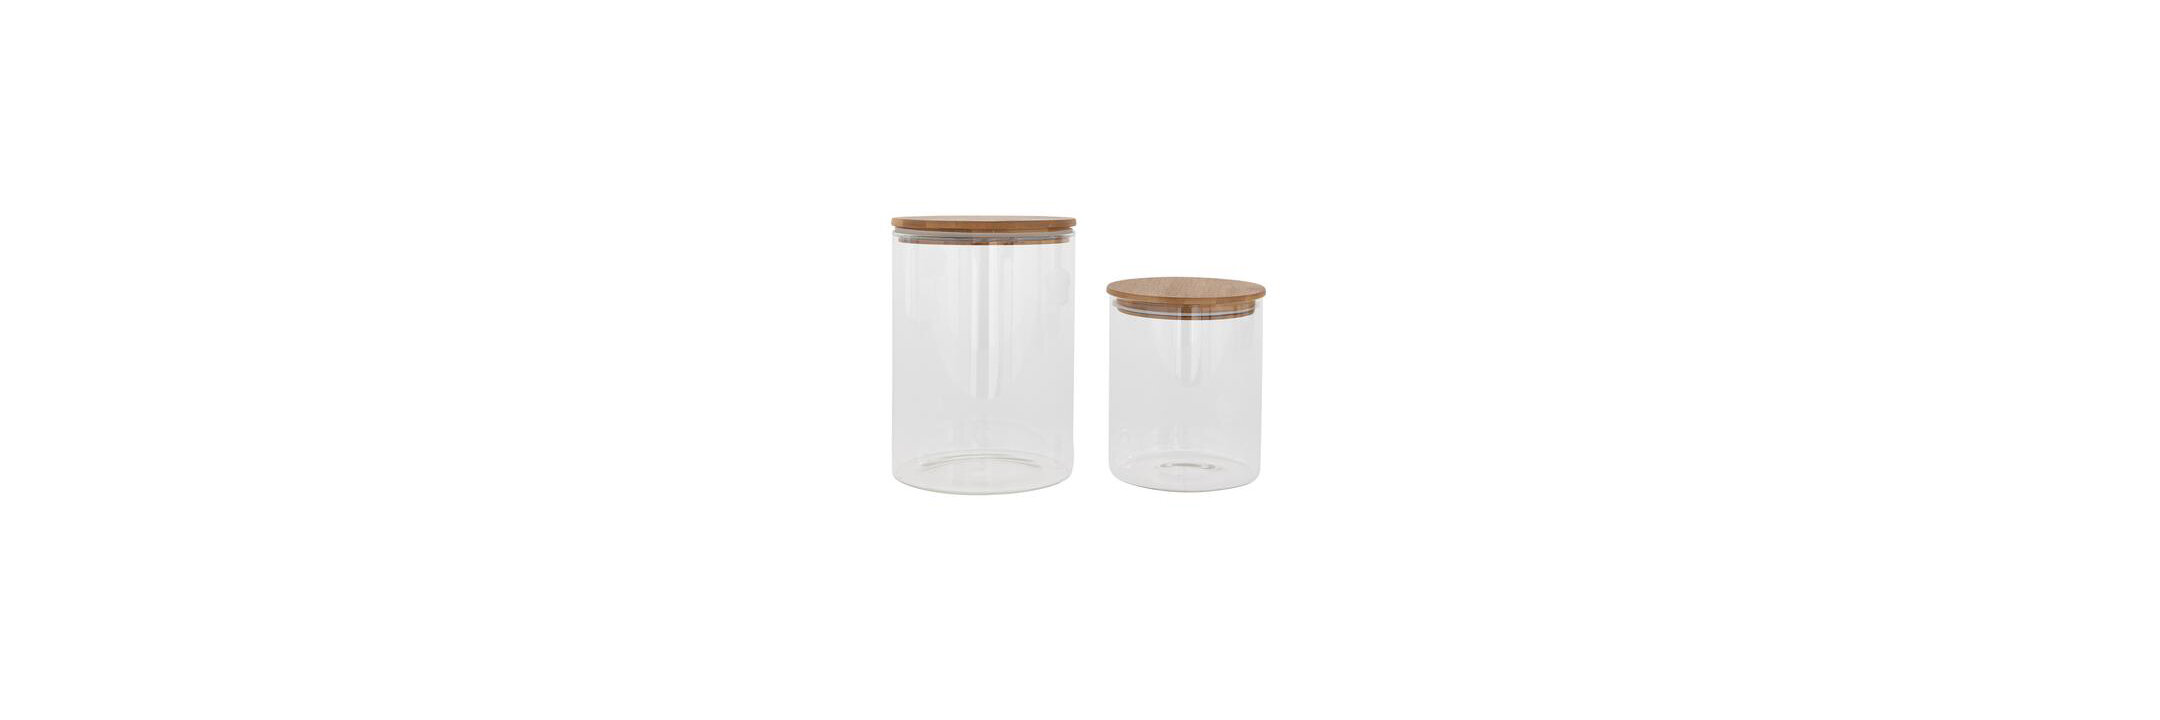 Glass Containers.jpg